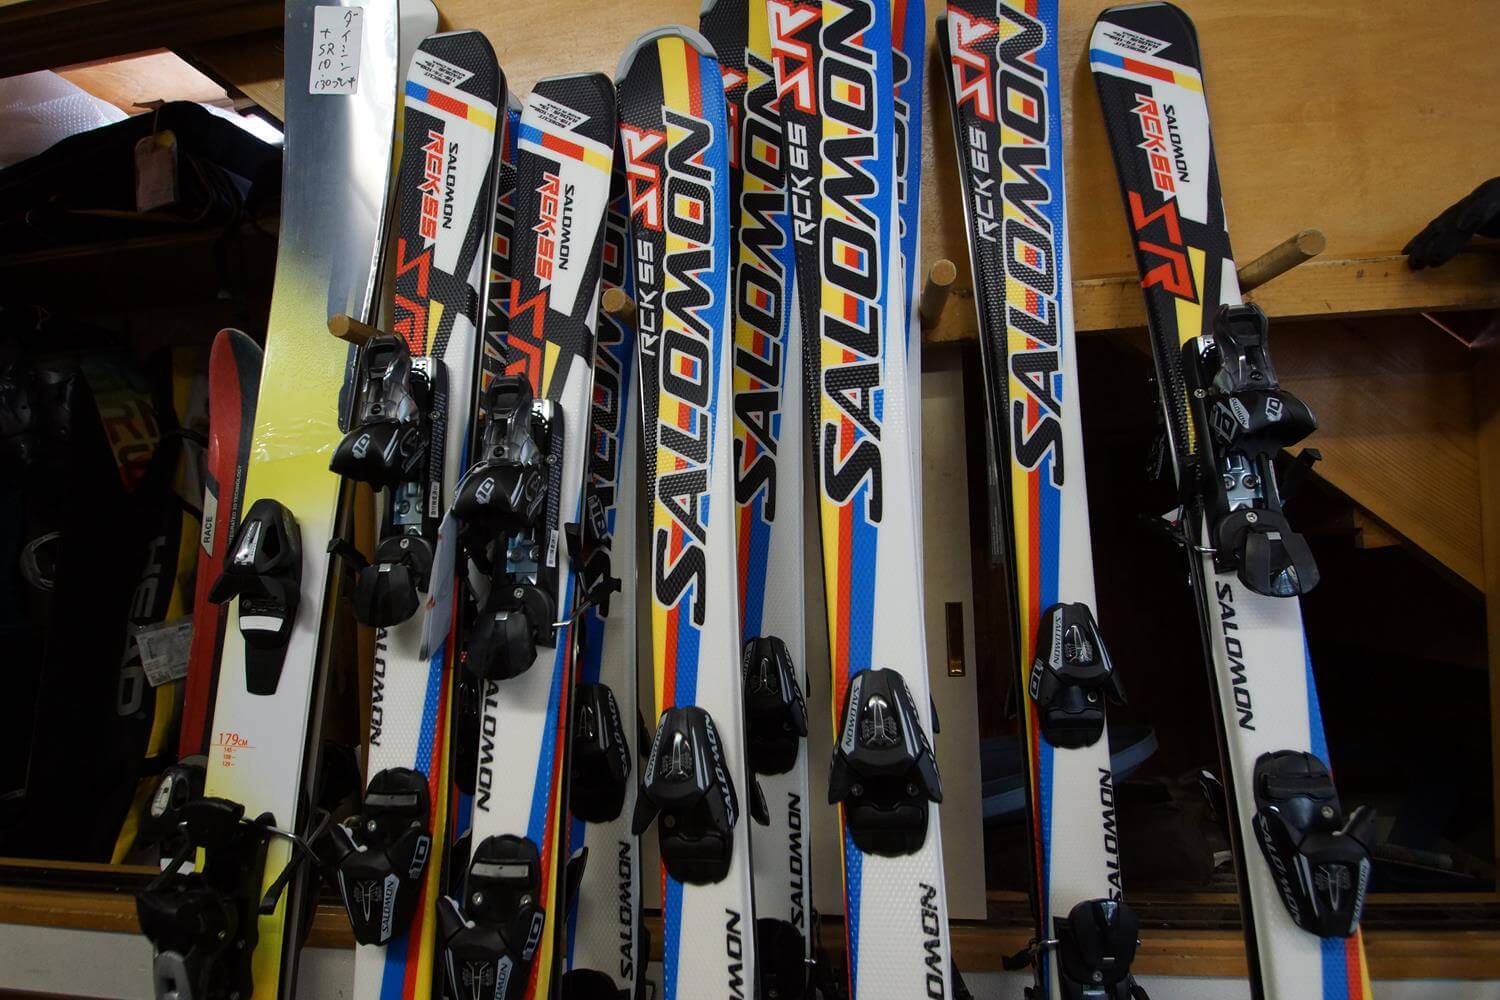 Rentals - Pod Snowsports - Get Your Skis and Snowboard Today!